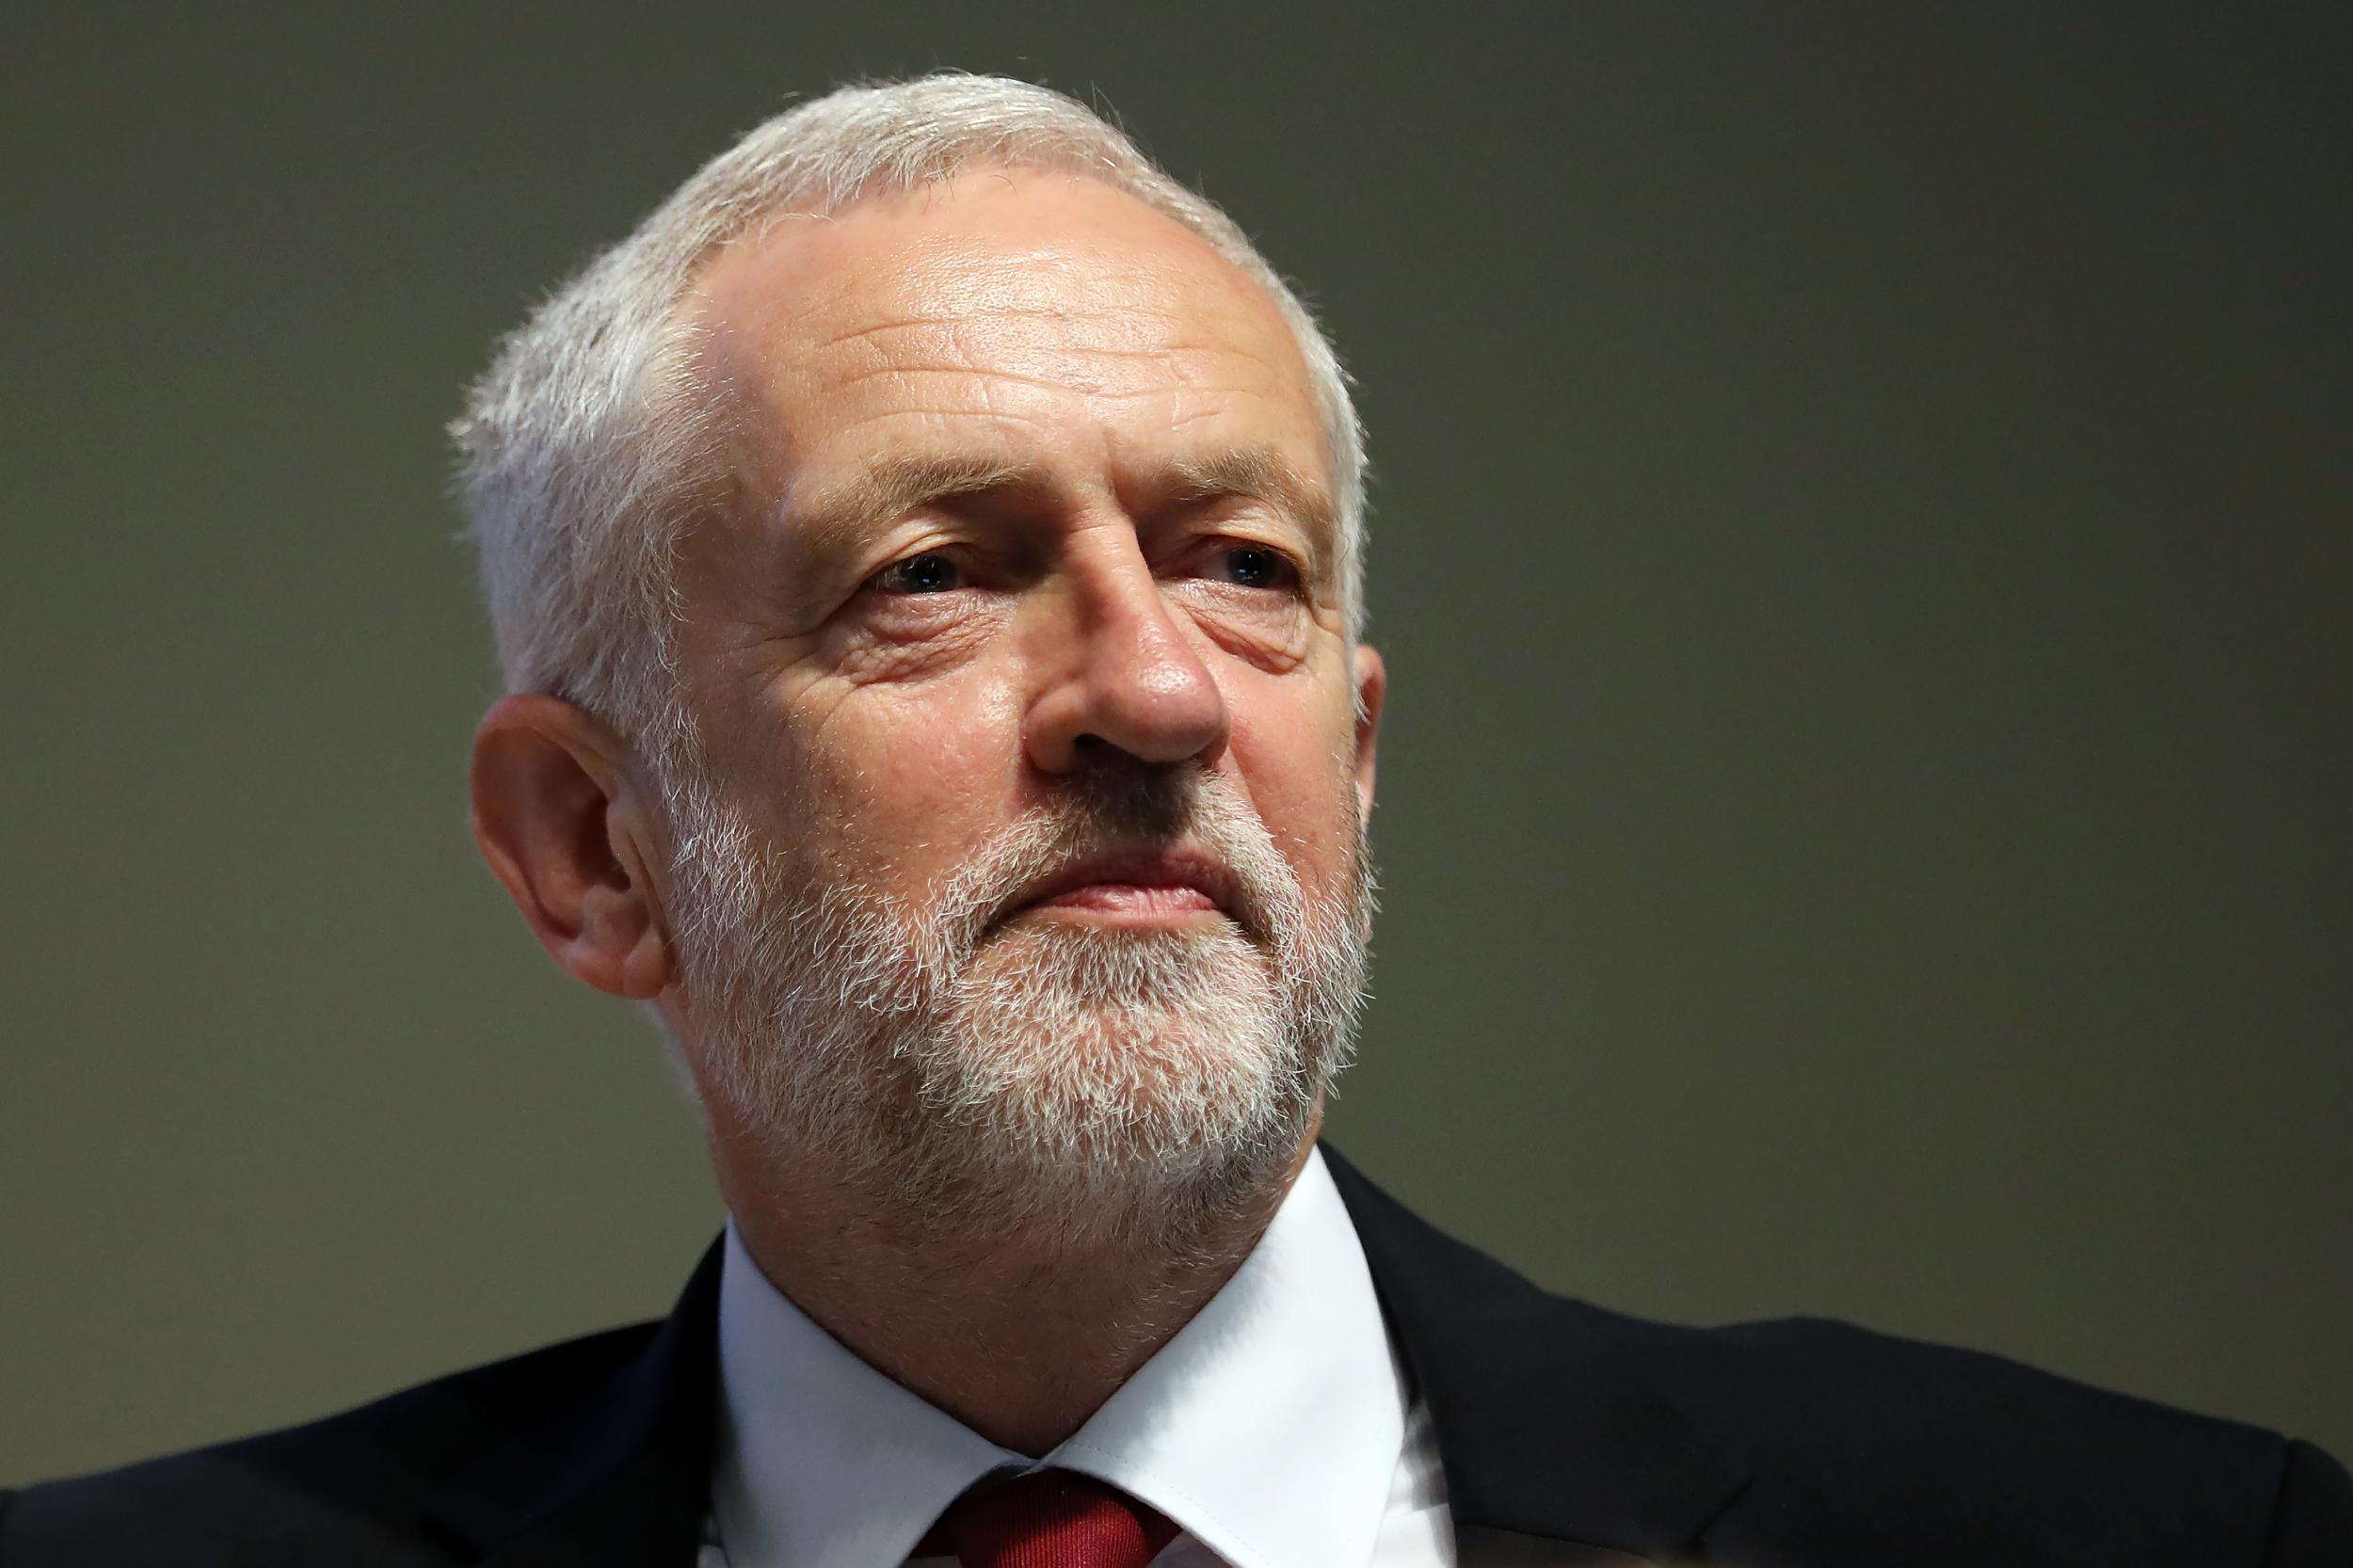 Jeremy Corbyn's allies are set to push ahead with plans to make it easier for left-wing candidates to run for Labour leader